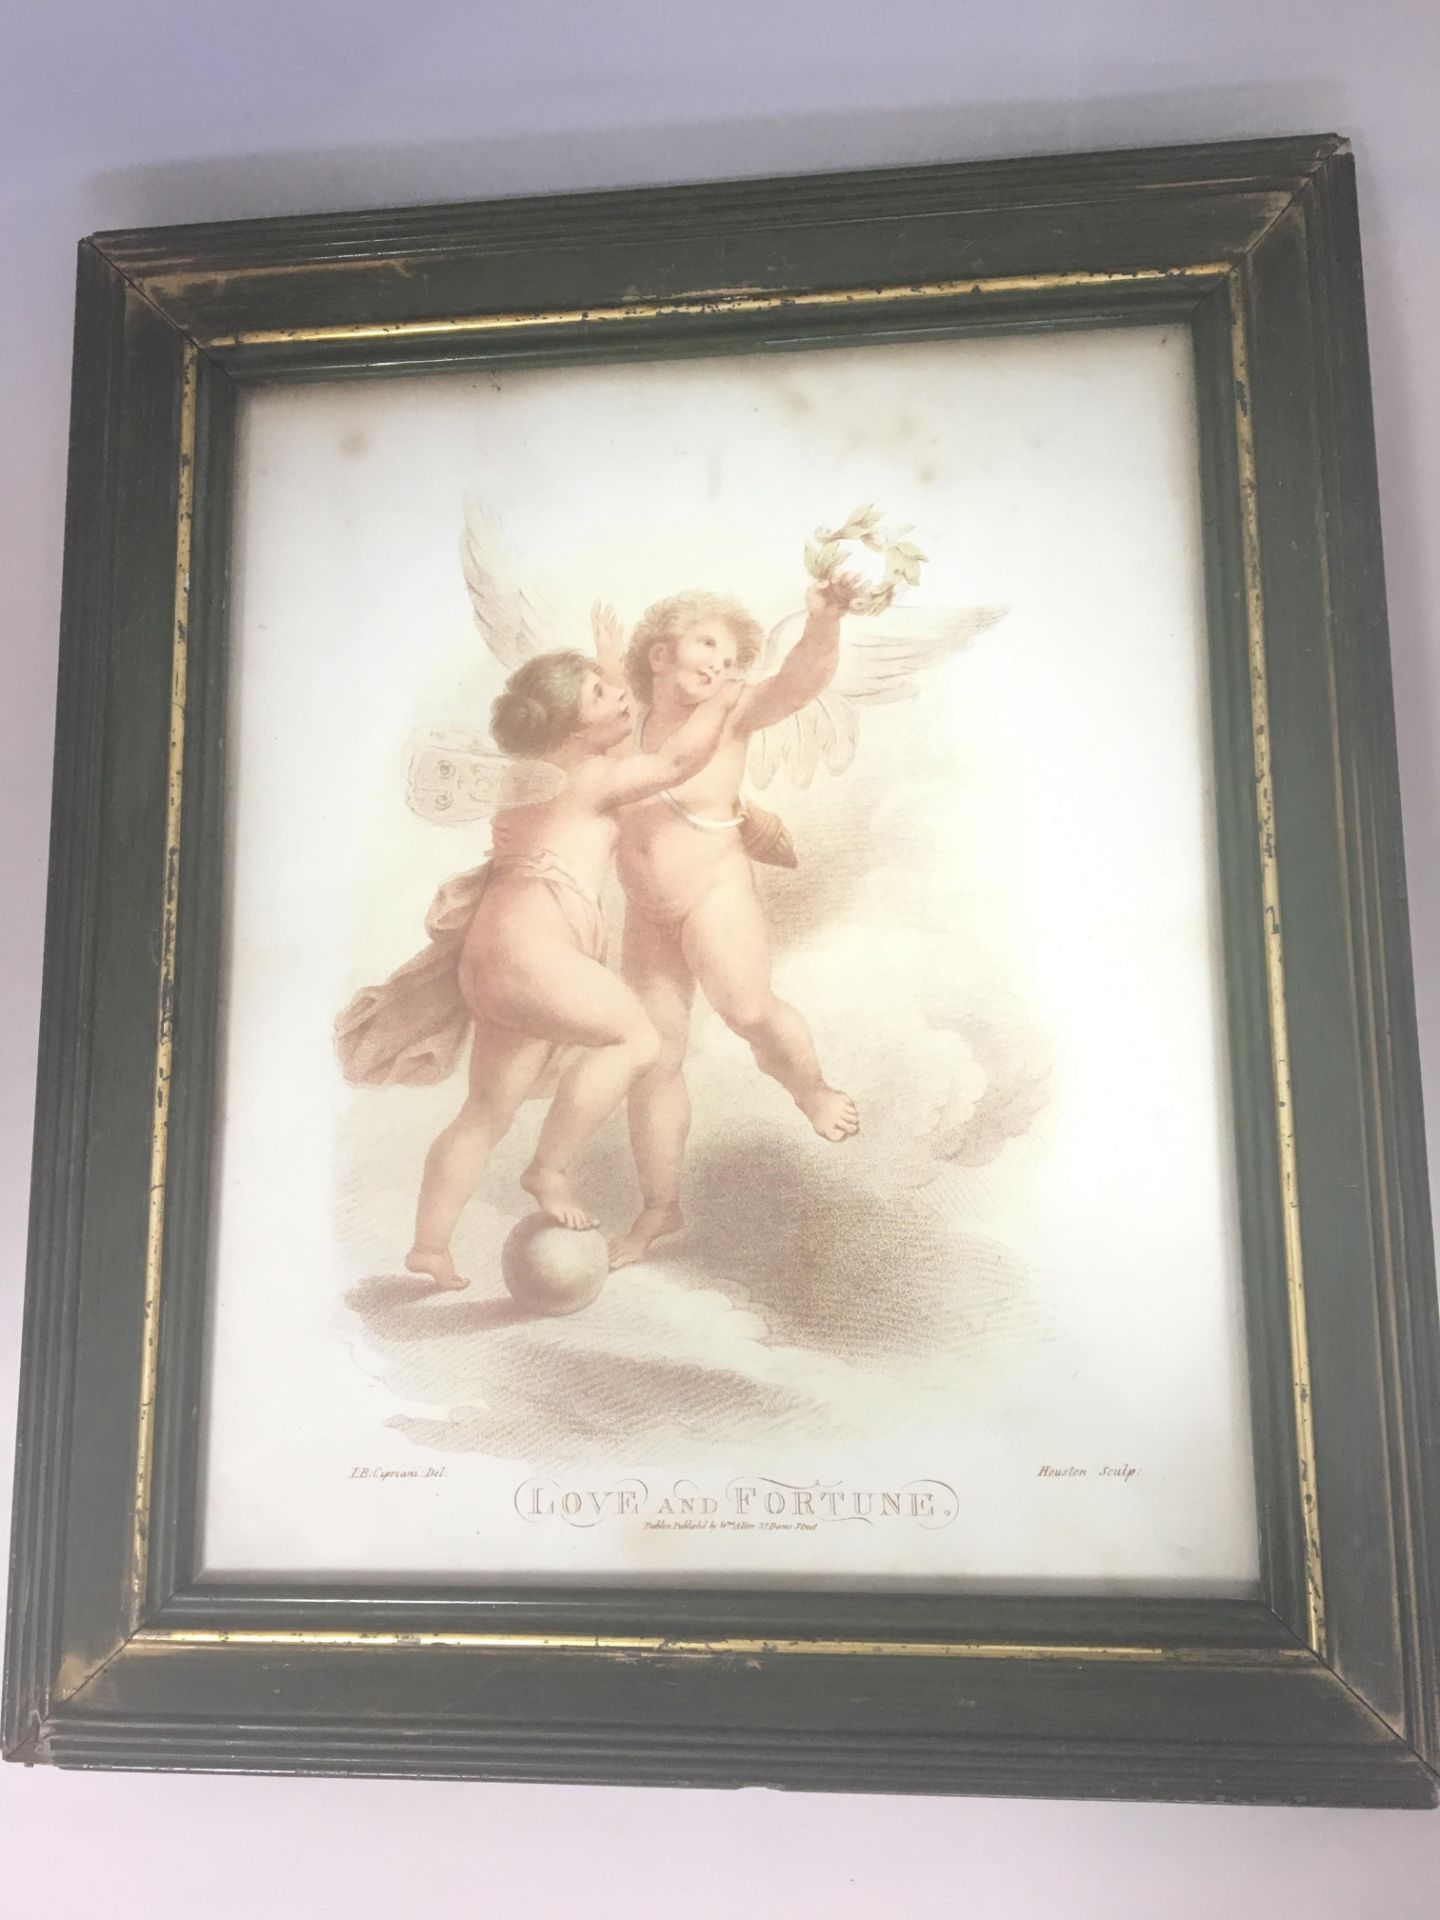 AFTER CIPRIANI - "LOVE AND FORTUNE", A 19th CENTURY SEPIA STIPPLE ENGRAVING BY HOUSTON, APPROX 35cm,